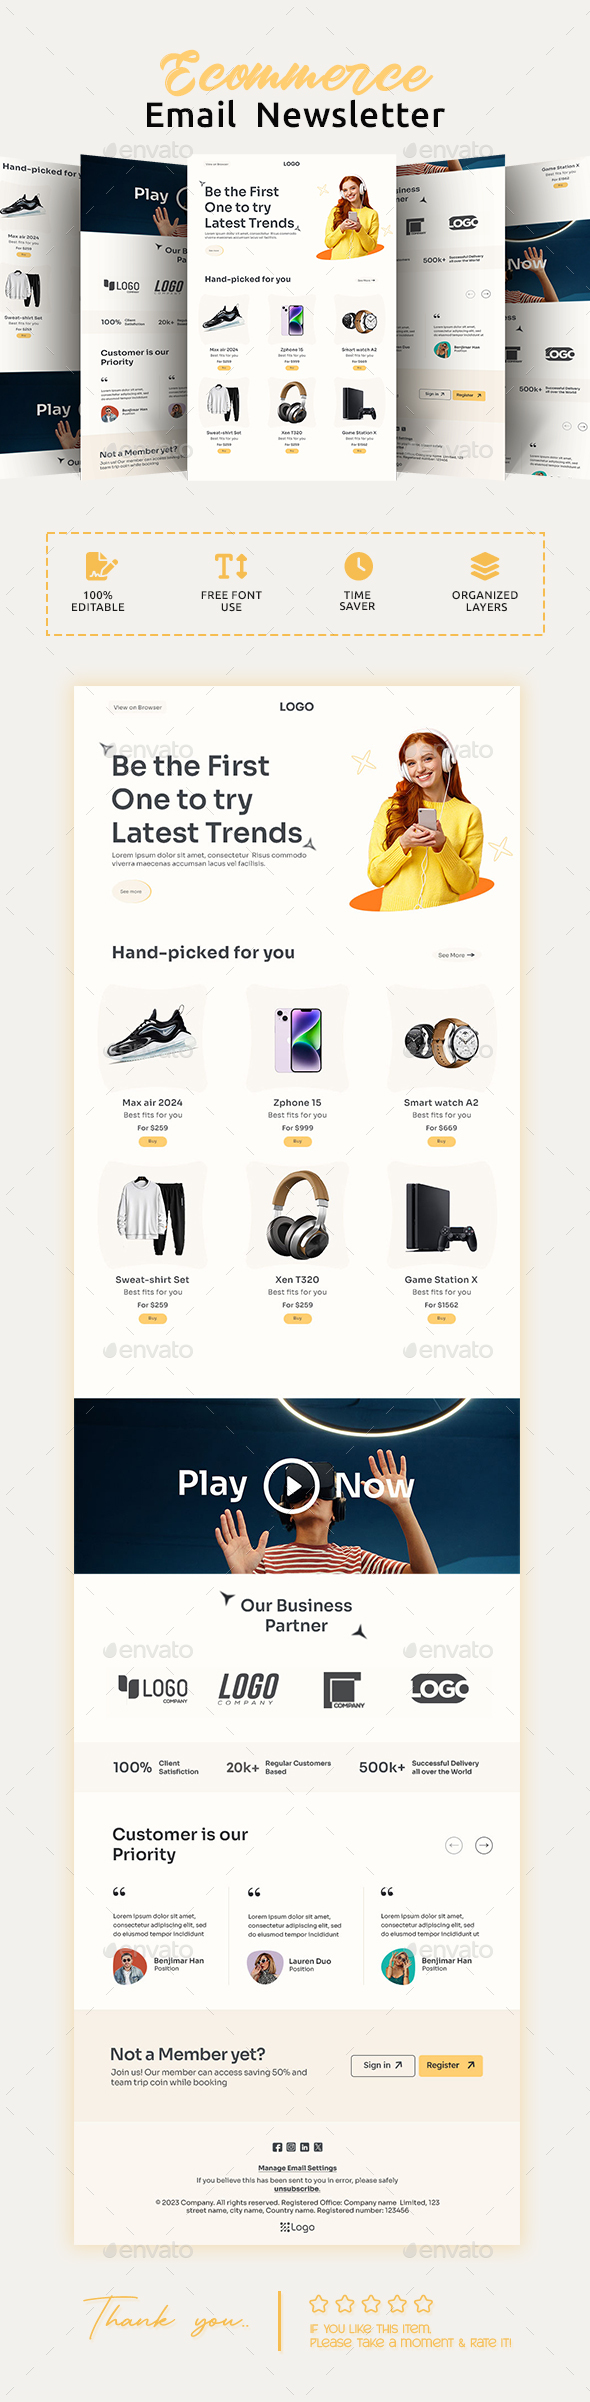 E-commerce Email Newsletter PSD Template